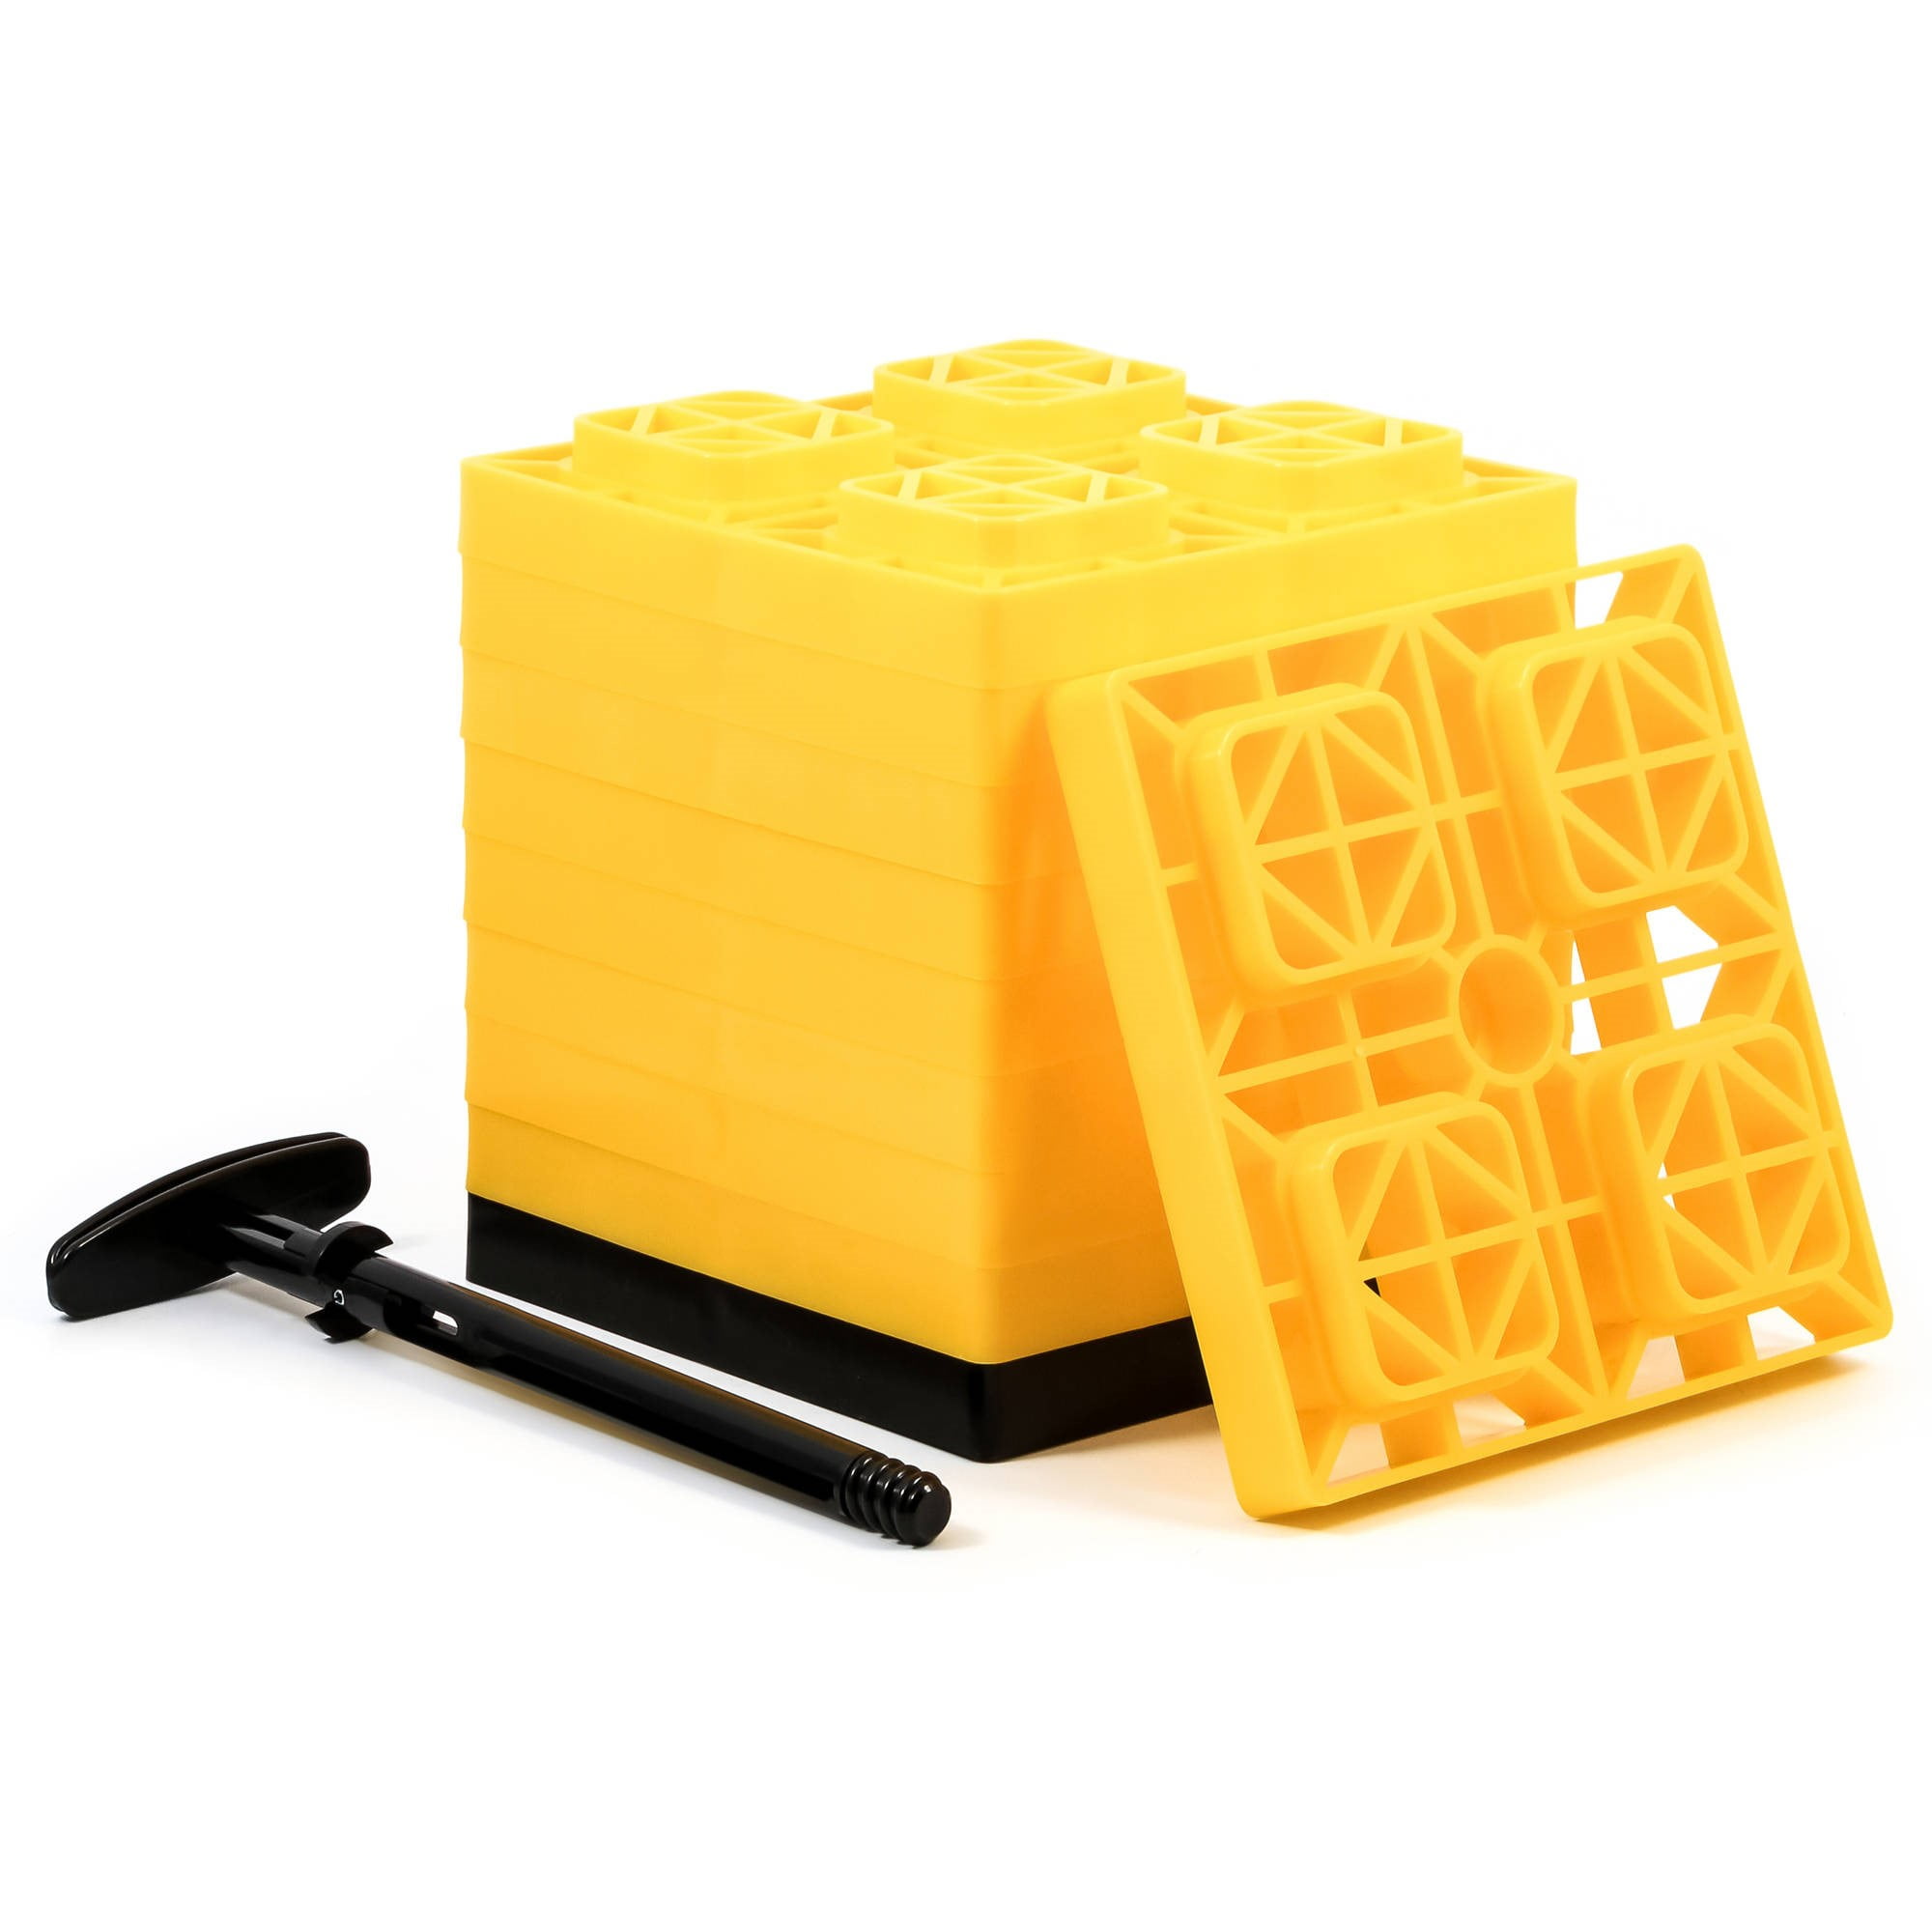 Camco FasTen Leveling Blocks with T-Handle,2x2,Yellow 10 Pk (E/F)